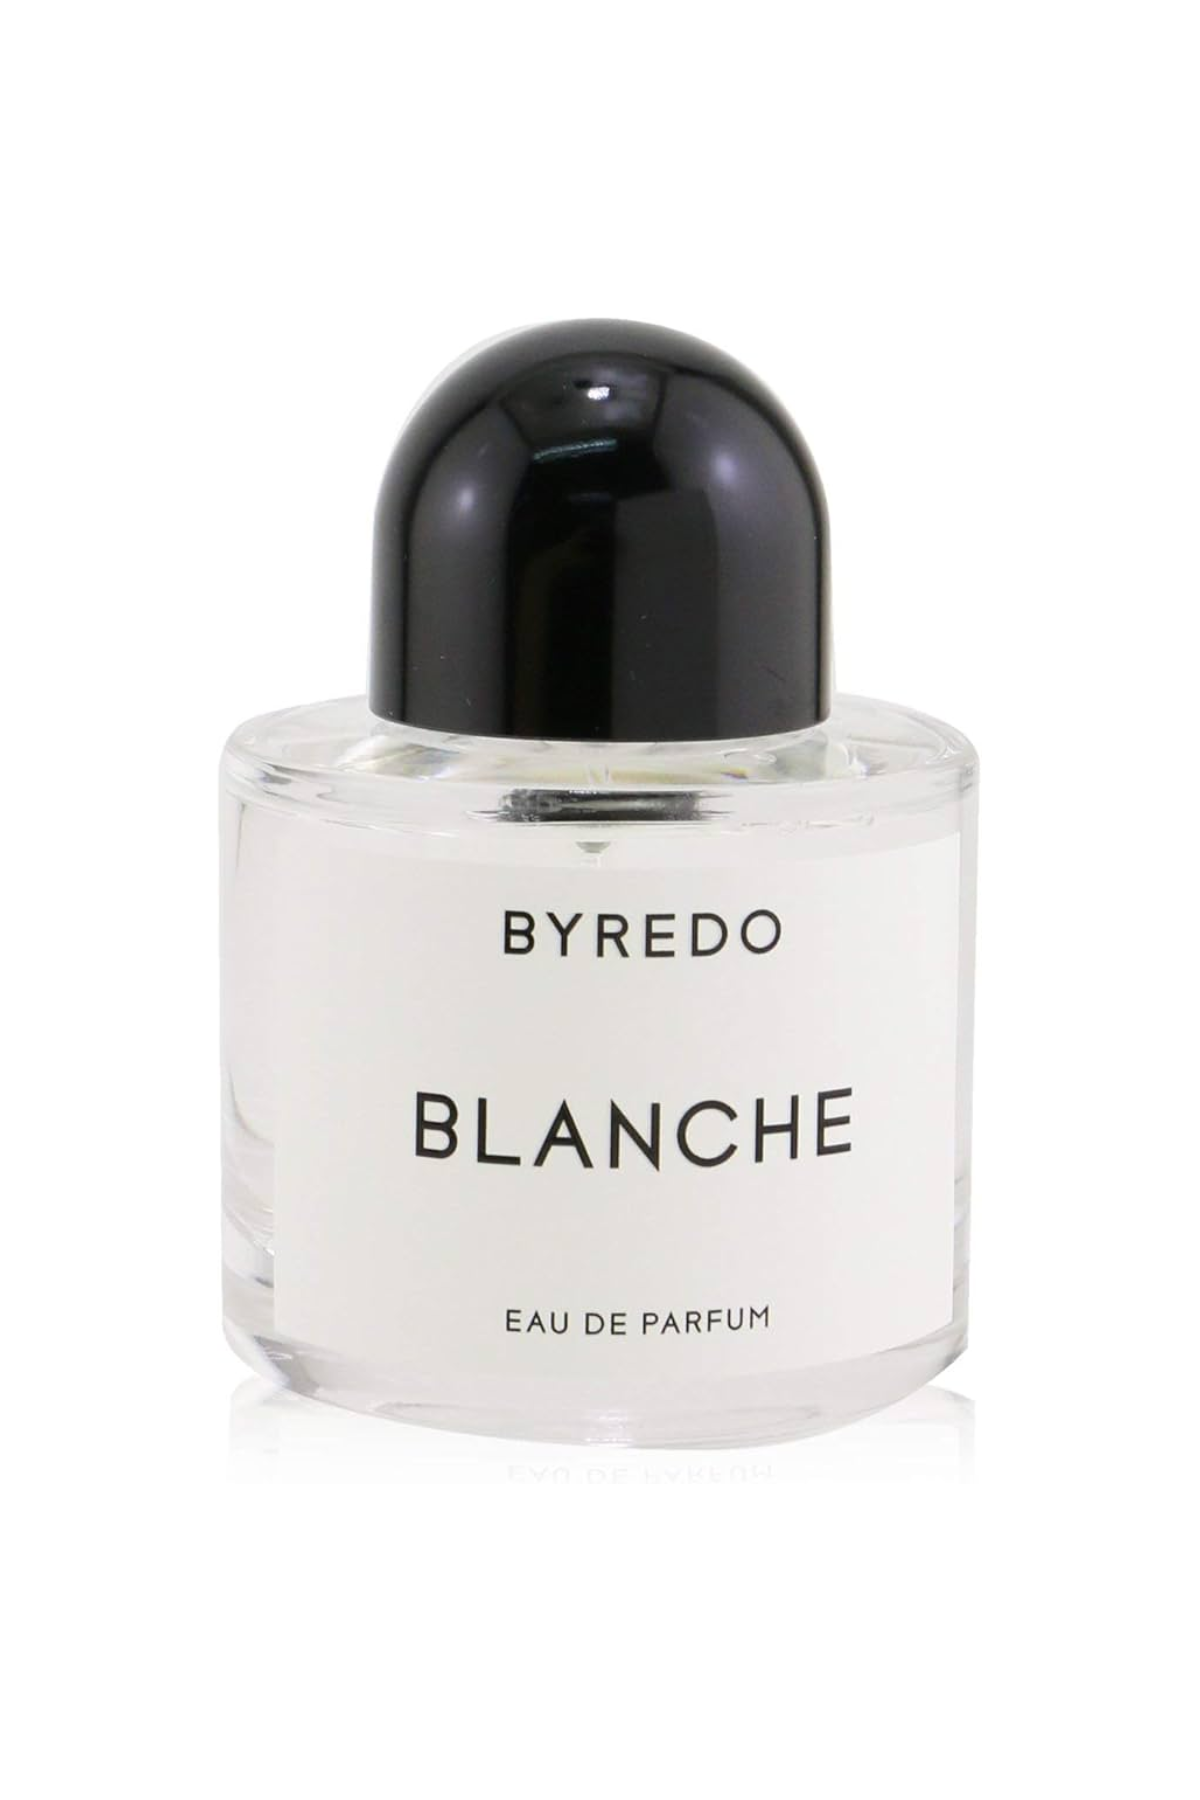 A bottle of Byredo Blanche perfume against a white background.